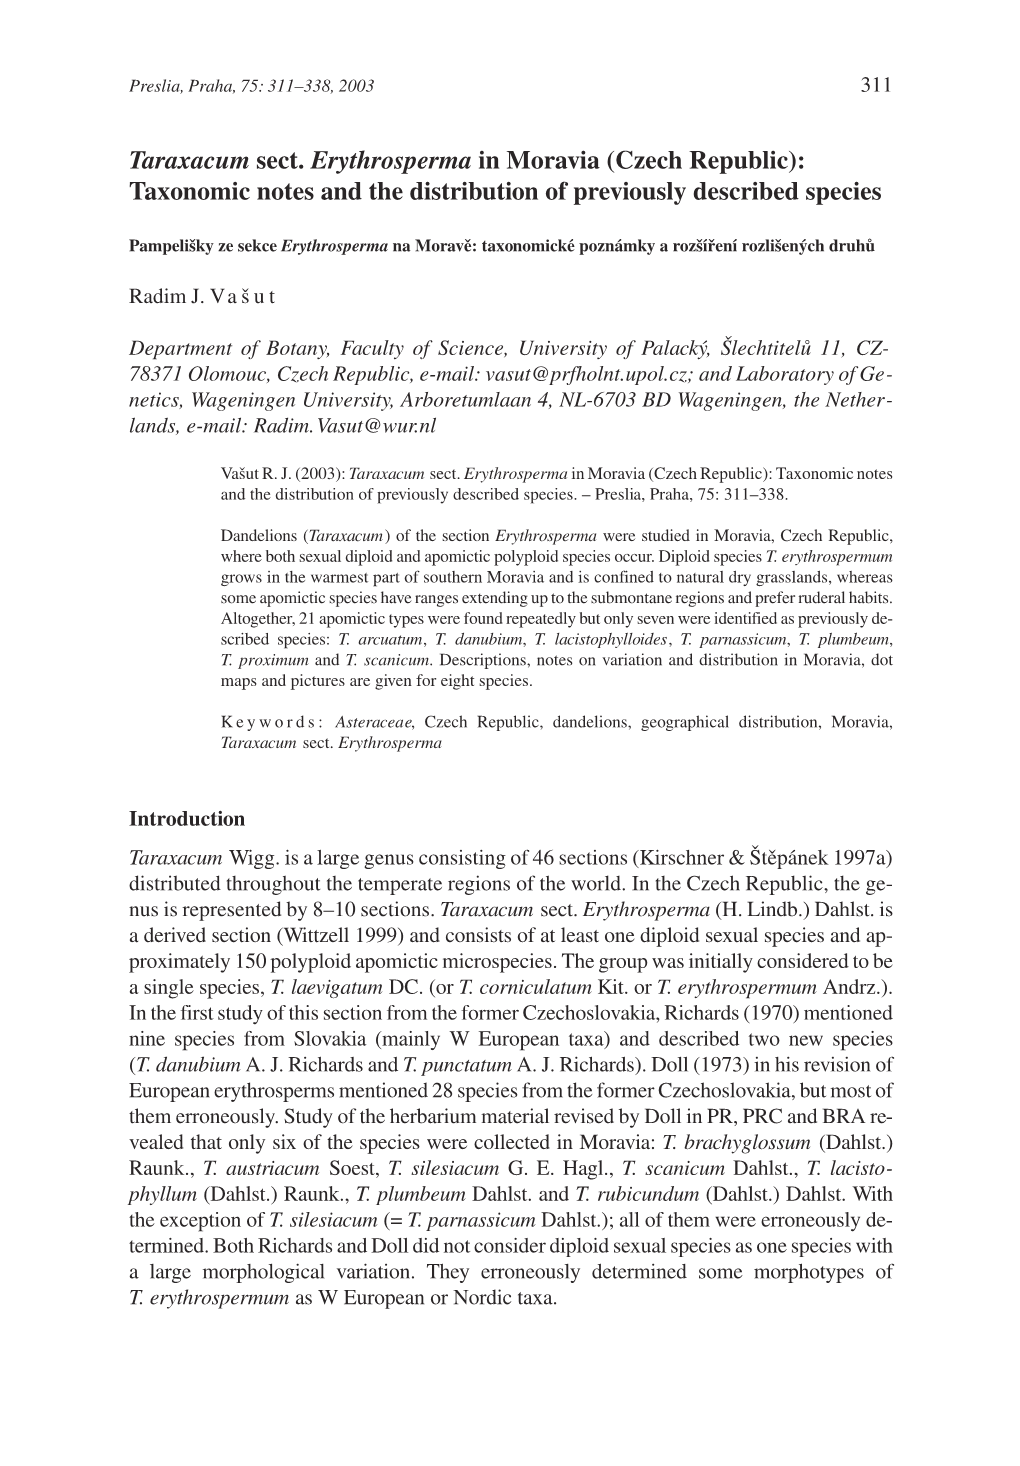 Taraxacum Sect. Erythrosperma in Moravia (Czech Republic): Taxonomic Notes and the Distribution of Previously Described Species